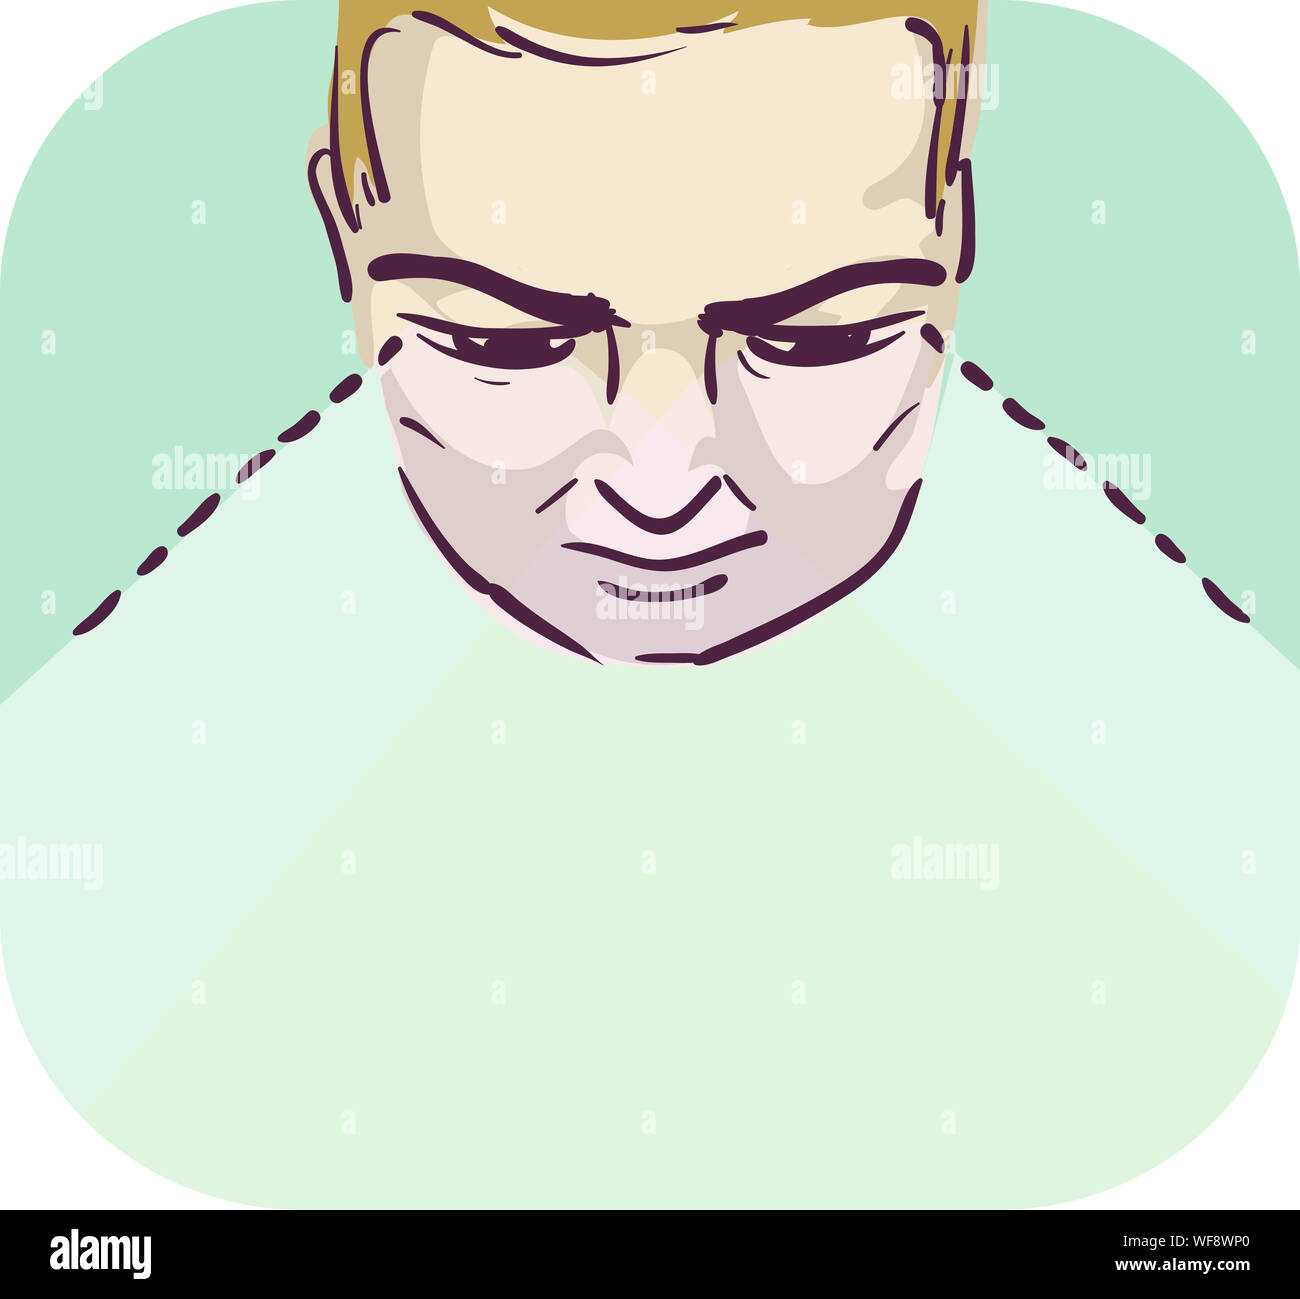 Illustration of a Man Showing Impairment of Vision Stock Photo